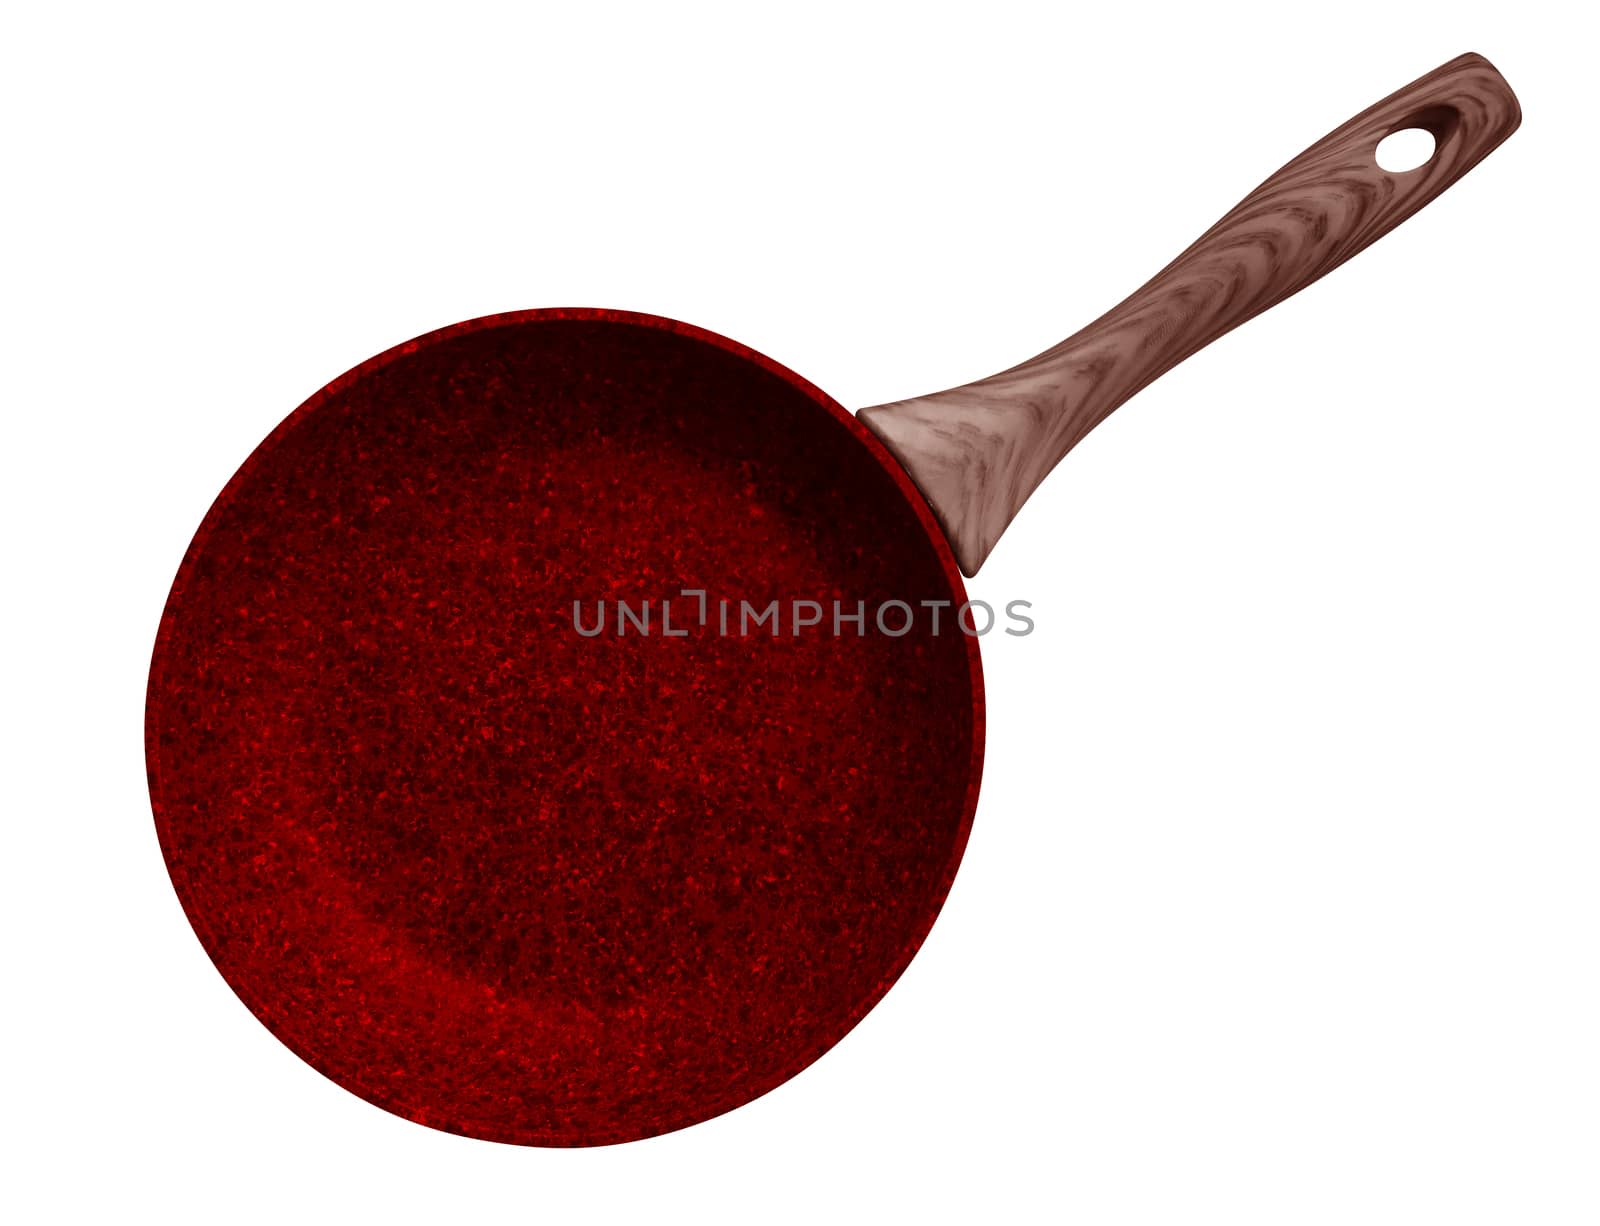 Red Stone Coated Frying Pan isolated on white. Clipping Path included.